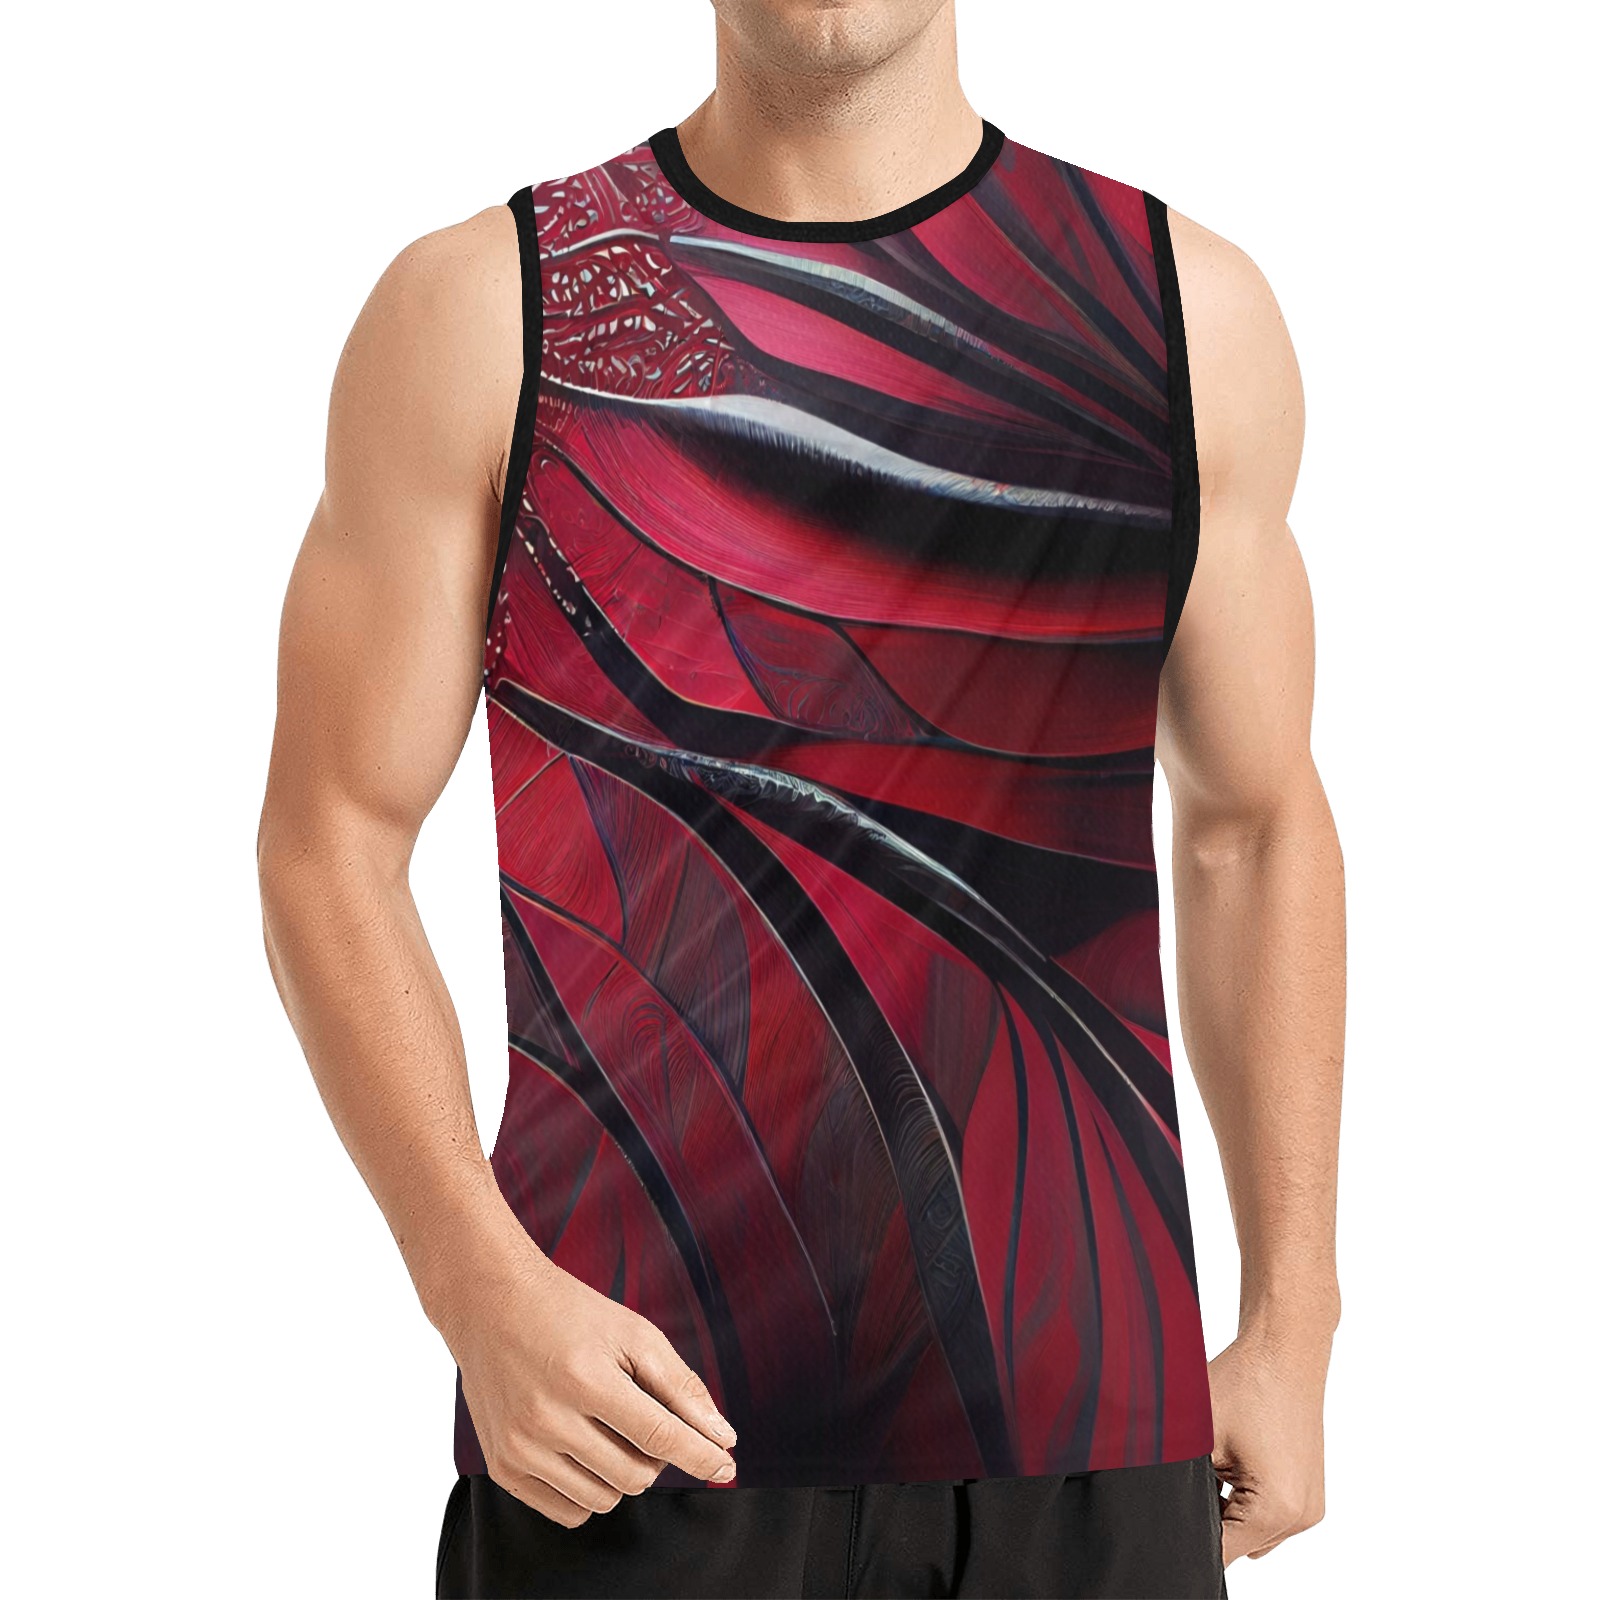 red and black curved pattern 3 All Over Print Basketball Jersey